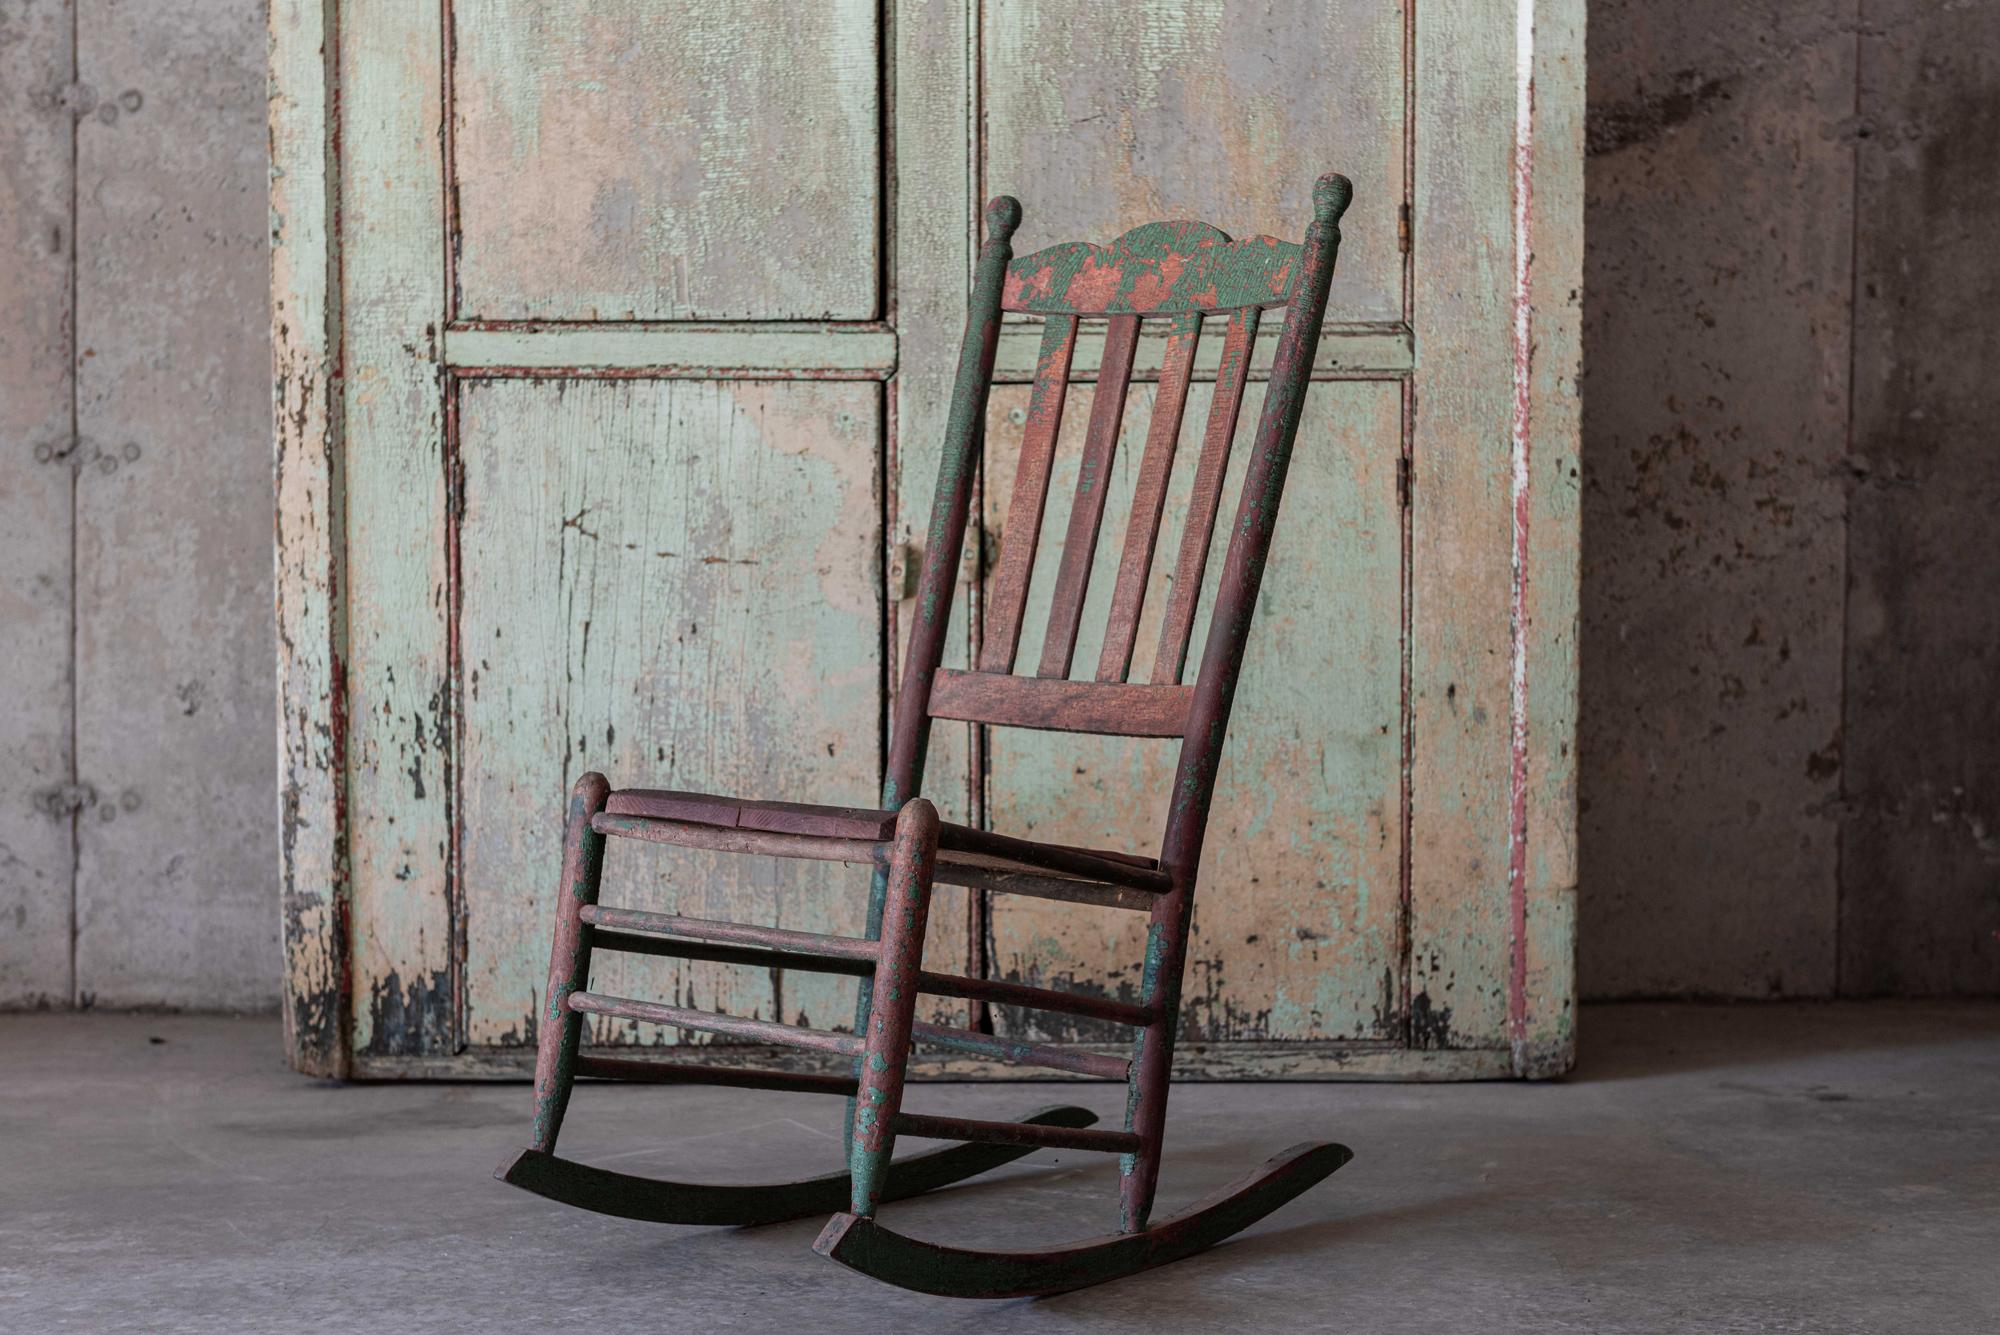 Circa 1880

19thC painted rocking chair

Sourced form North America - Lanark County

Measures: W 43 x D 73 x H 98 cm
Seat height 43cm.

    